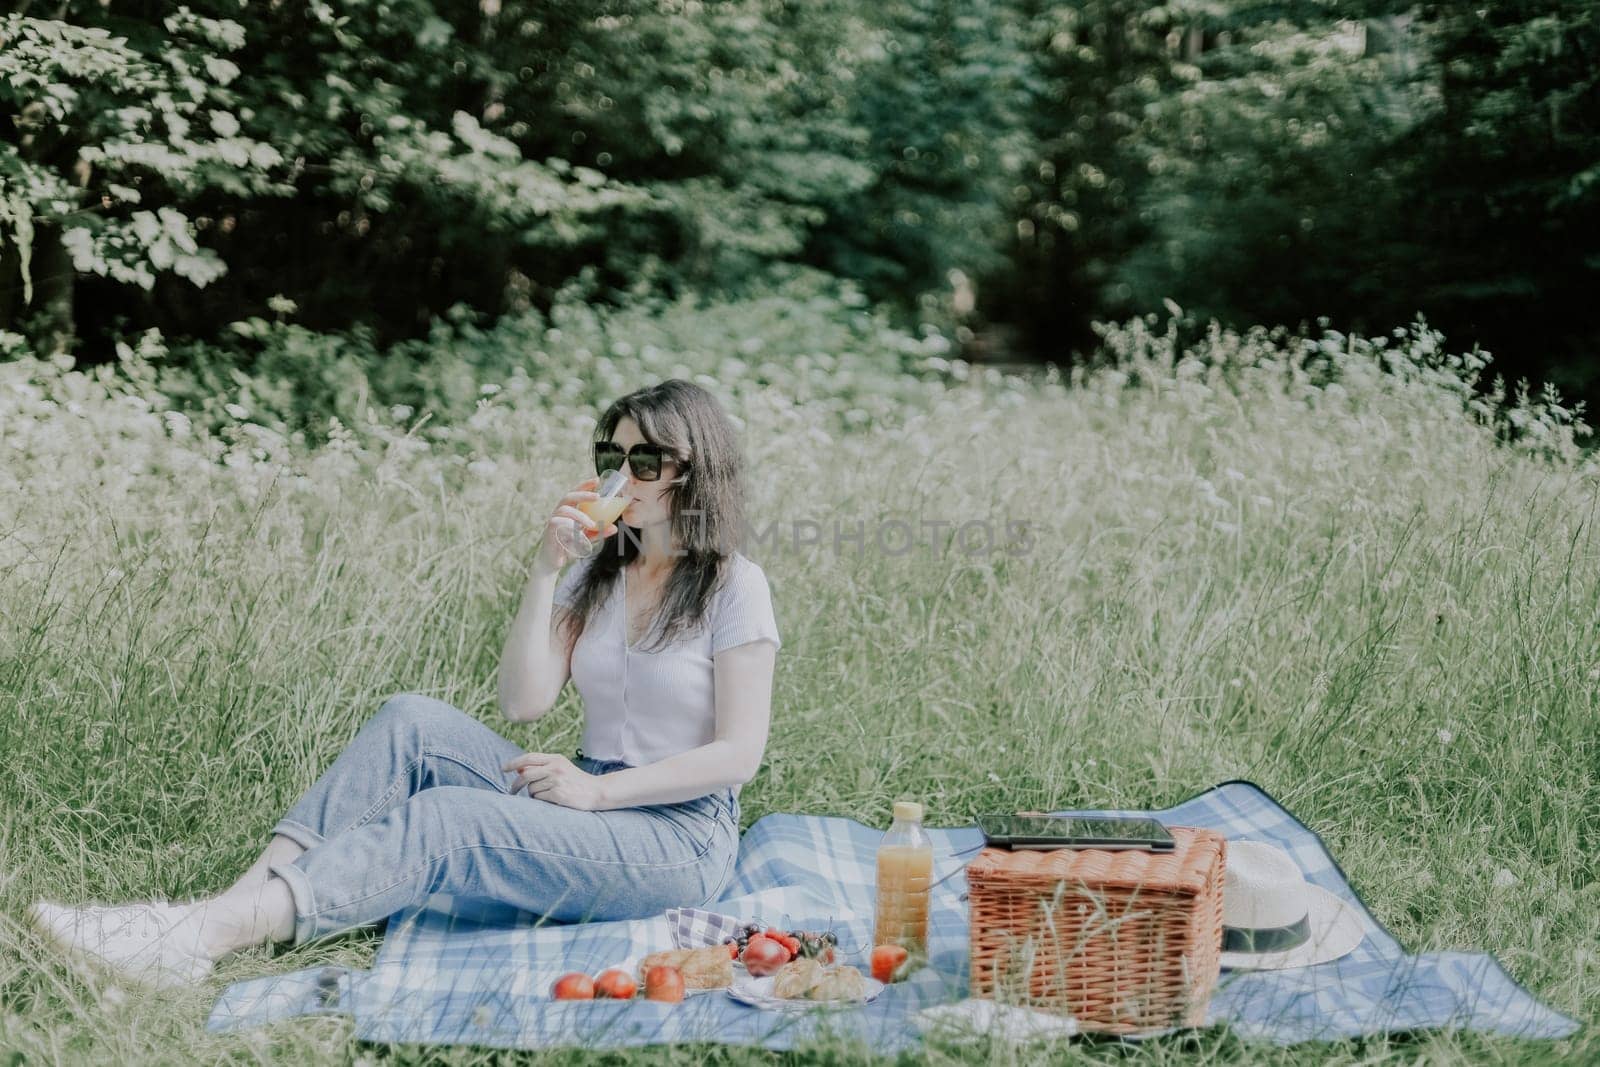 A young beautiful caucasian girl in sunglasses with brown hair, jeans and a t-shirt sits on the floor with a wicker basket, fruits in a plate and seductively drinks fresh orange juice from a glass against the backdrop of tall grasses and trees in a public park, close-up view. parks and forests, actually eat, a healthy lifestyle, lonely rest, healthy food and drinks.